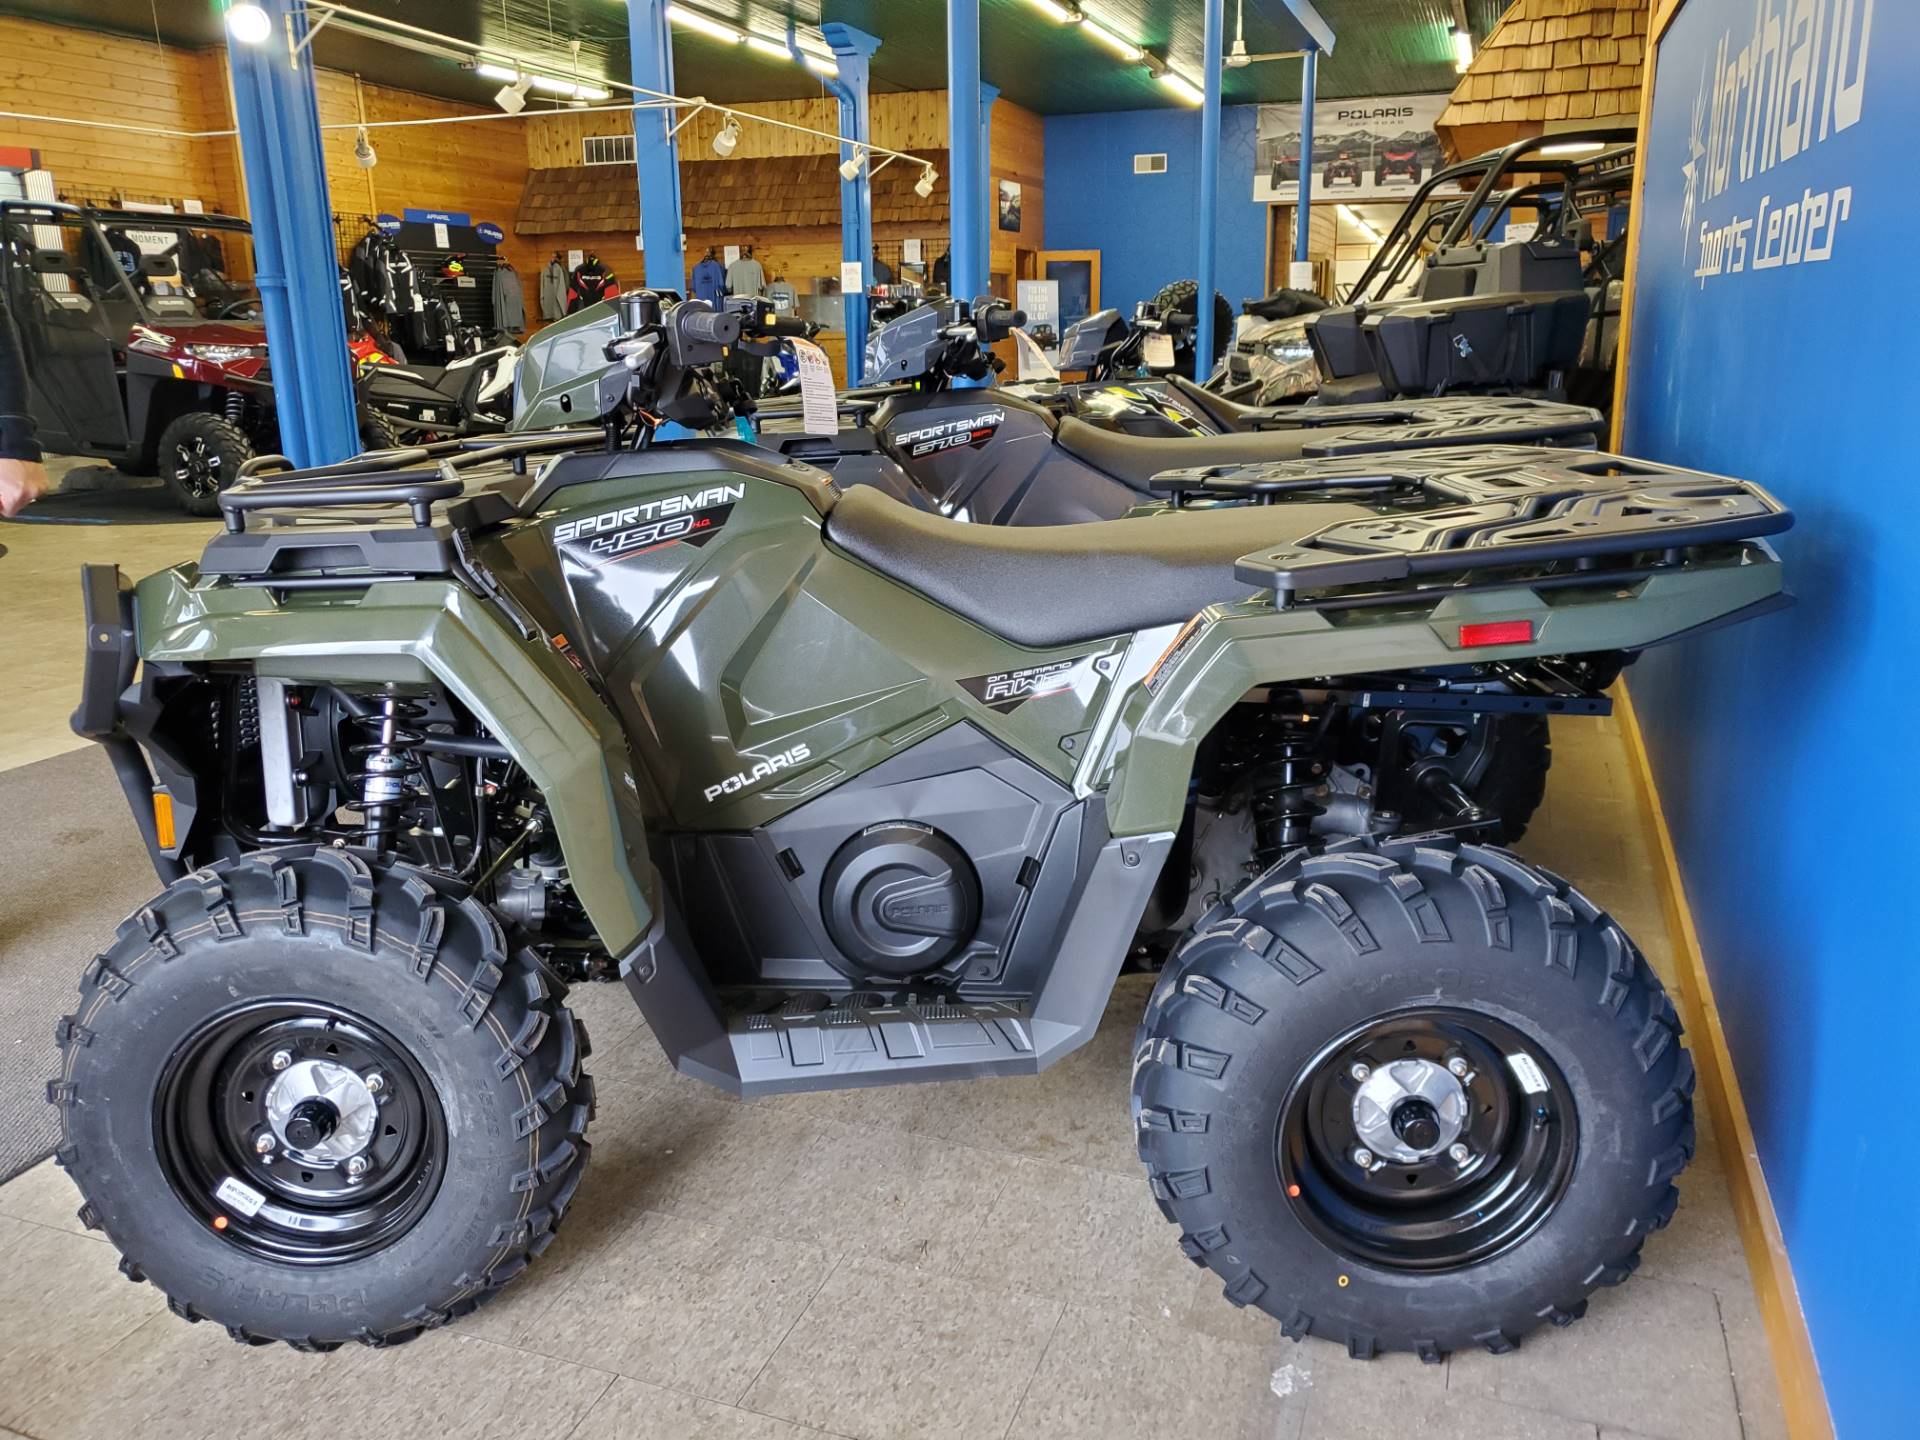 New 2021 Polaris Sportsman 450 H.O. Utility Package ATVs in Eagle